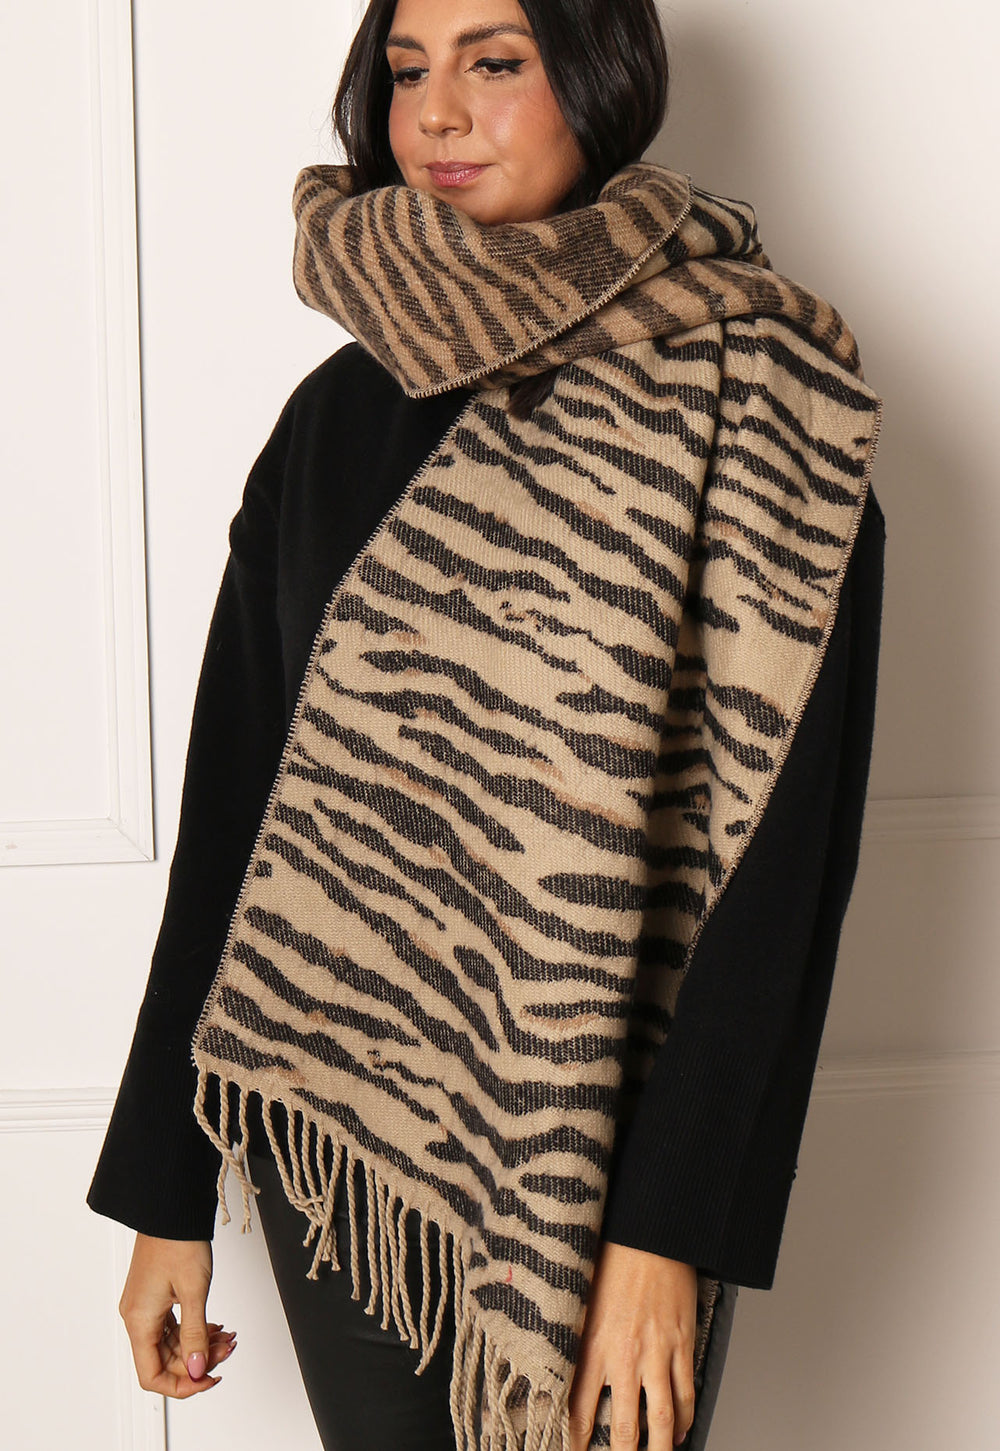 PIECES Zebra Print Oversized Brushed Scarf with Tassels in Beige & Black - One Nation Clothing